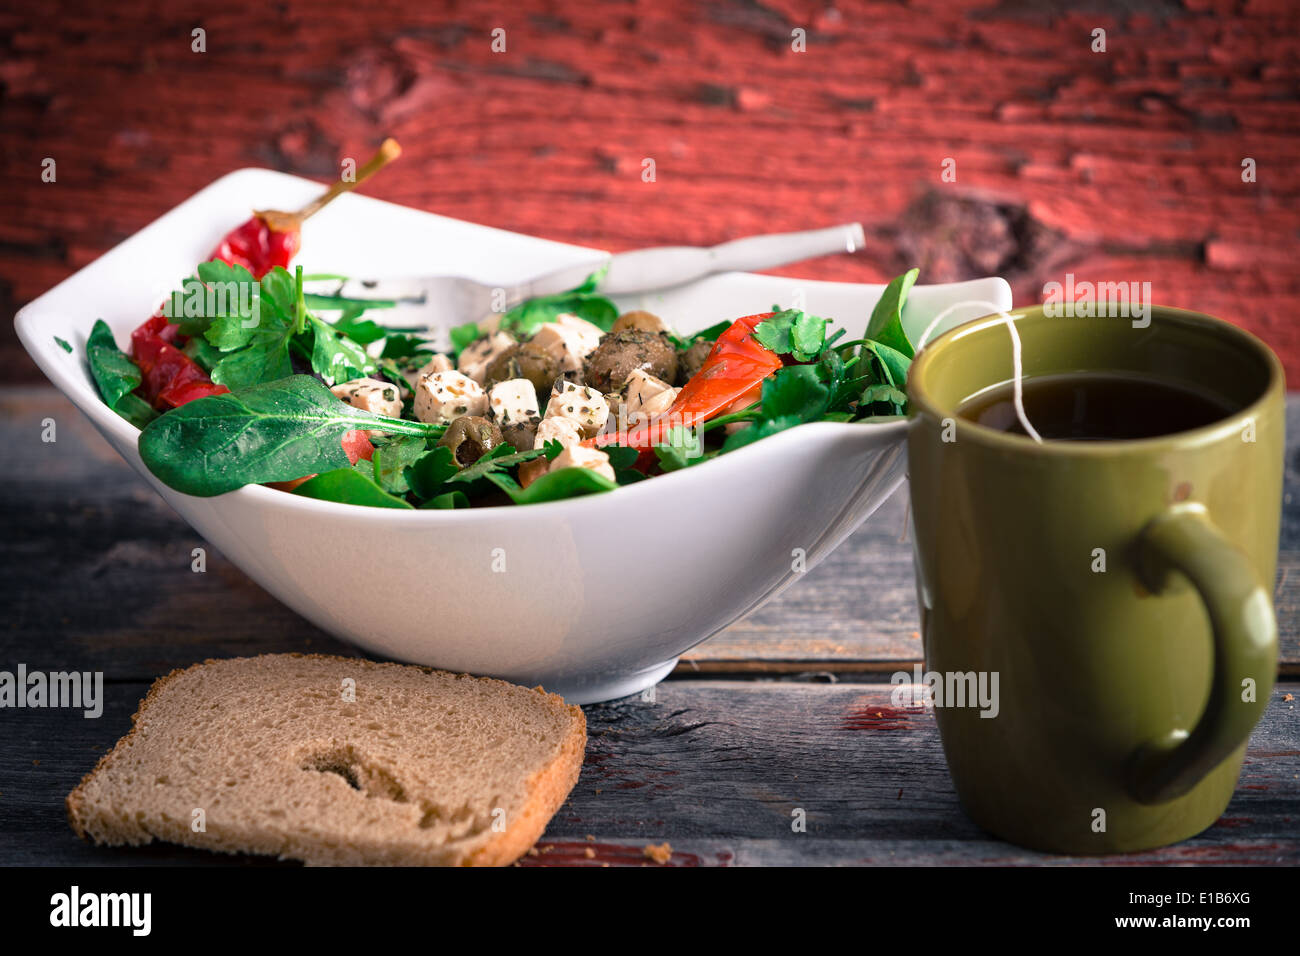 Bowl of delicious fresh baby spinach, tomato and feta salad with a mug of hot tea and a slice of bread served for lunch on a rus Stock Photo